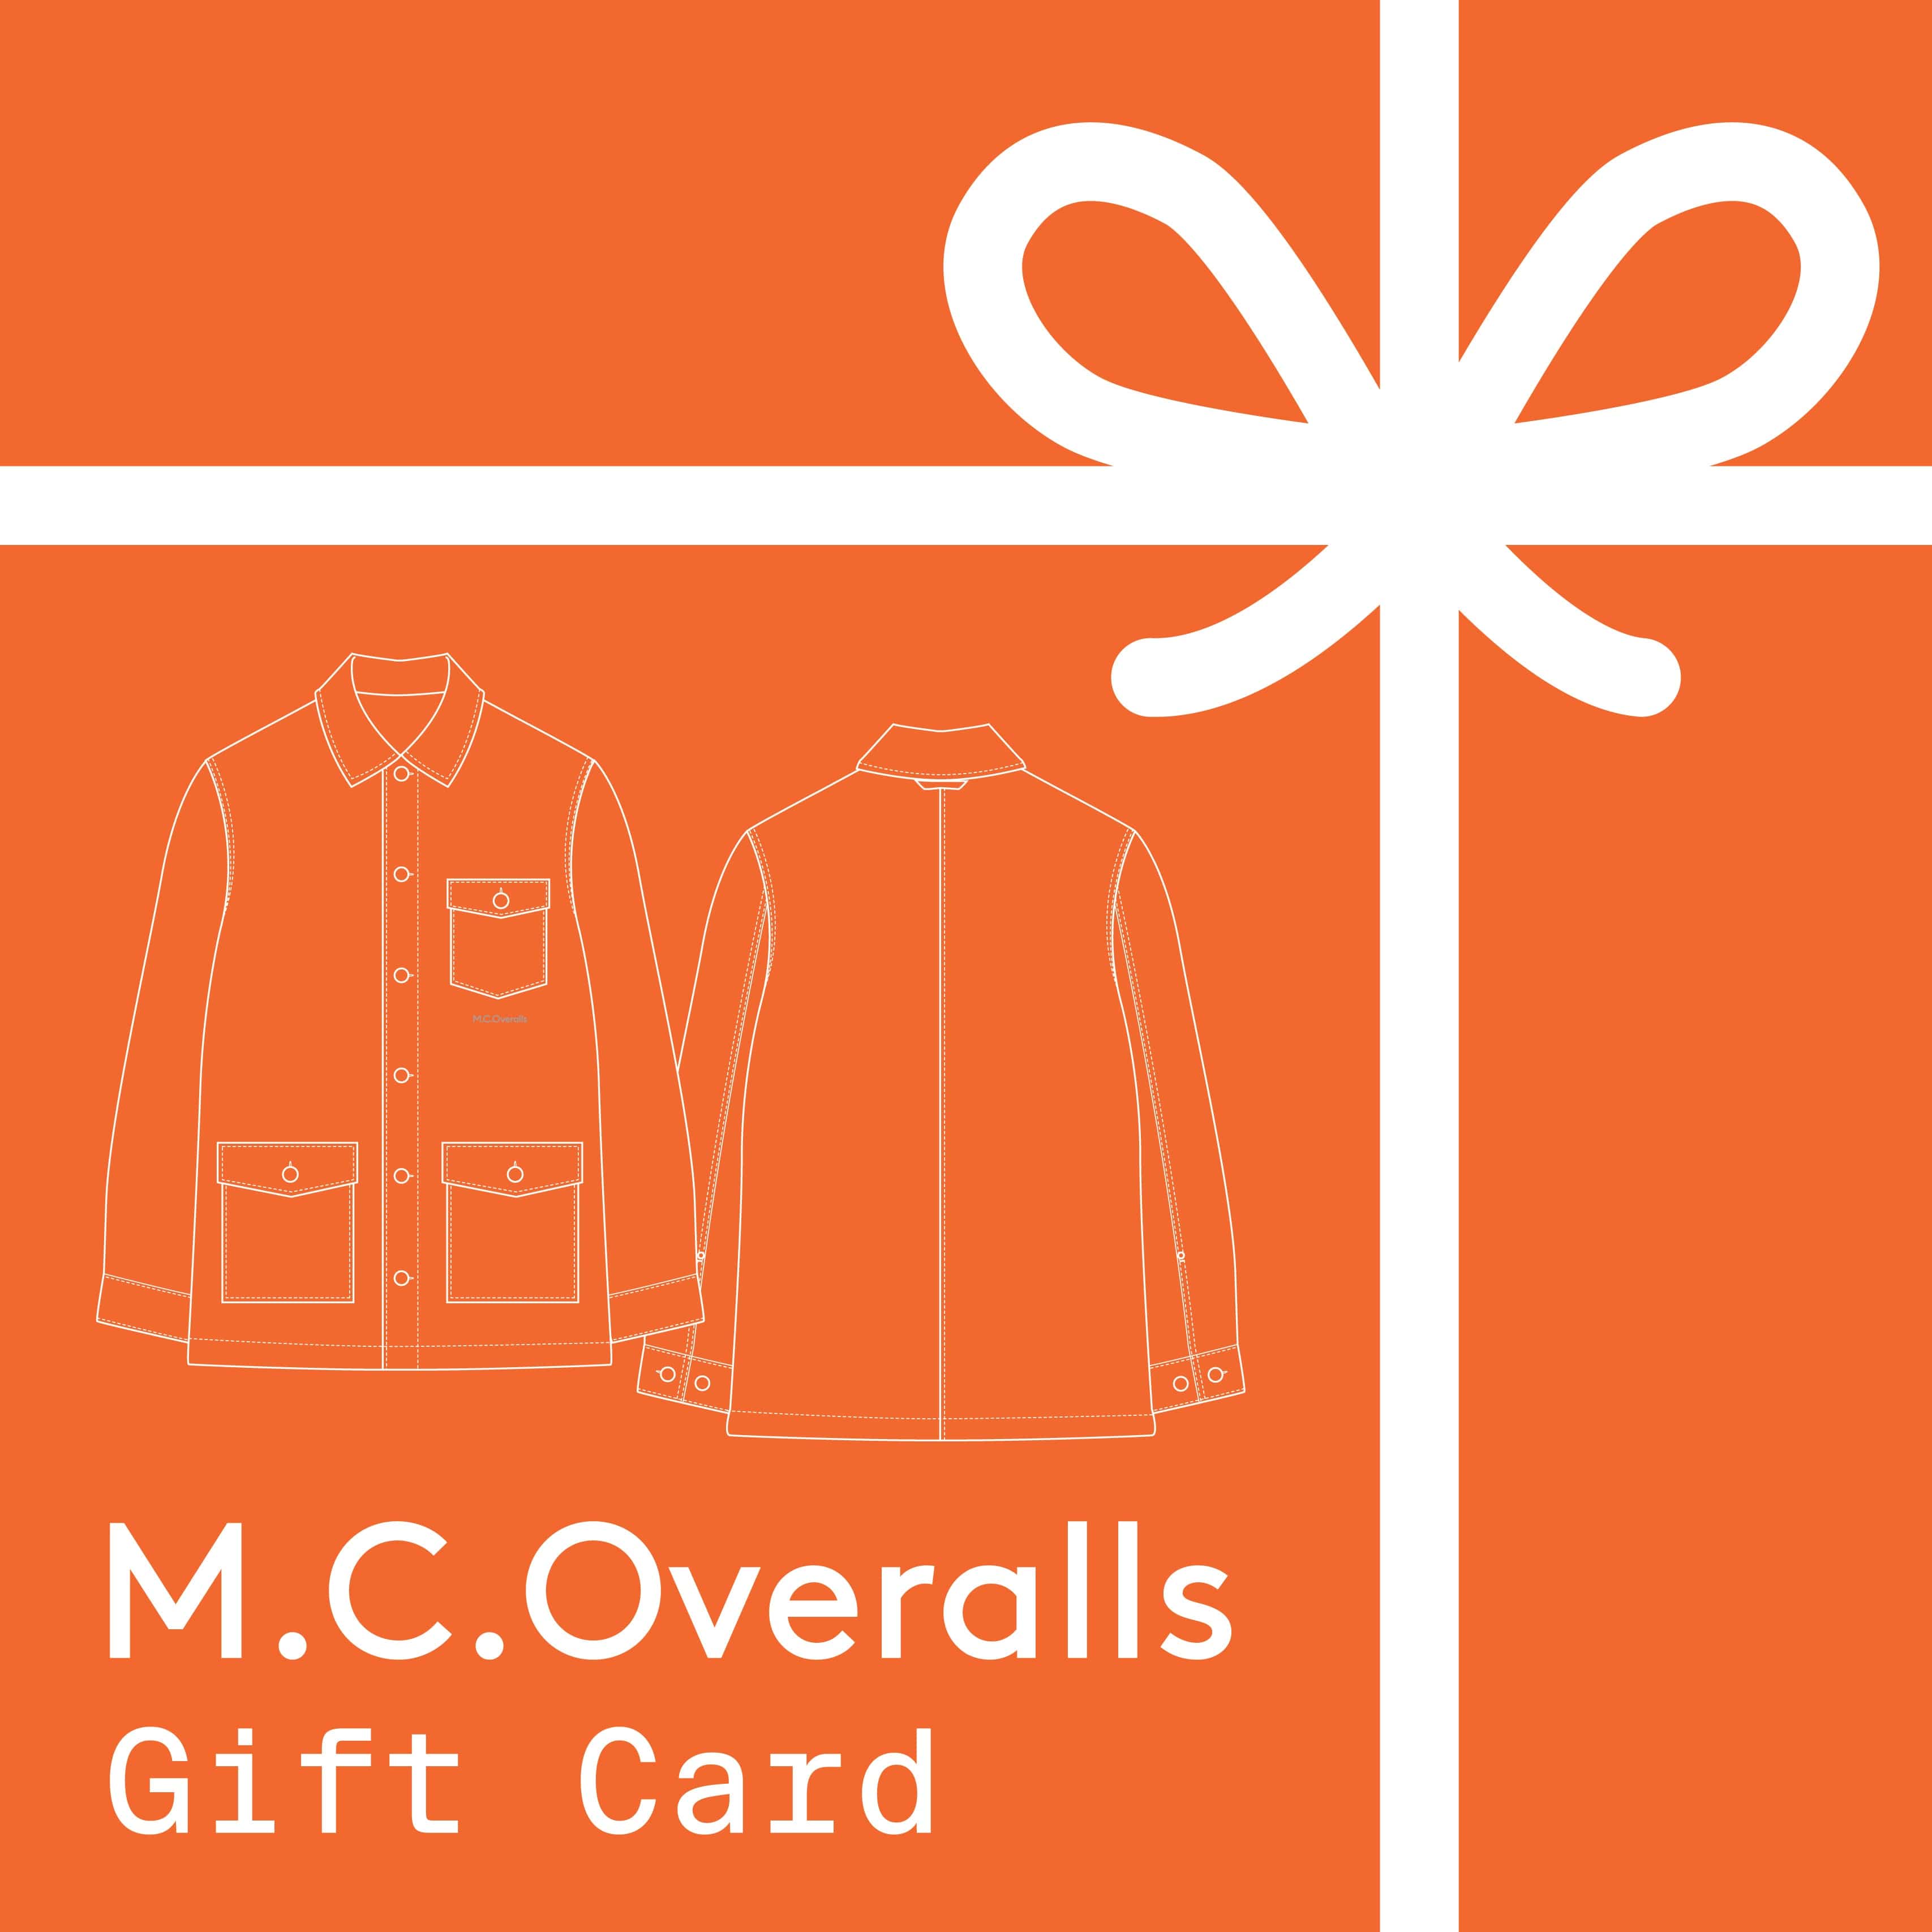 M.C.Overalls Gift Card